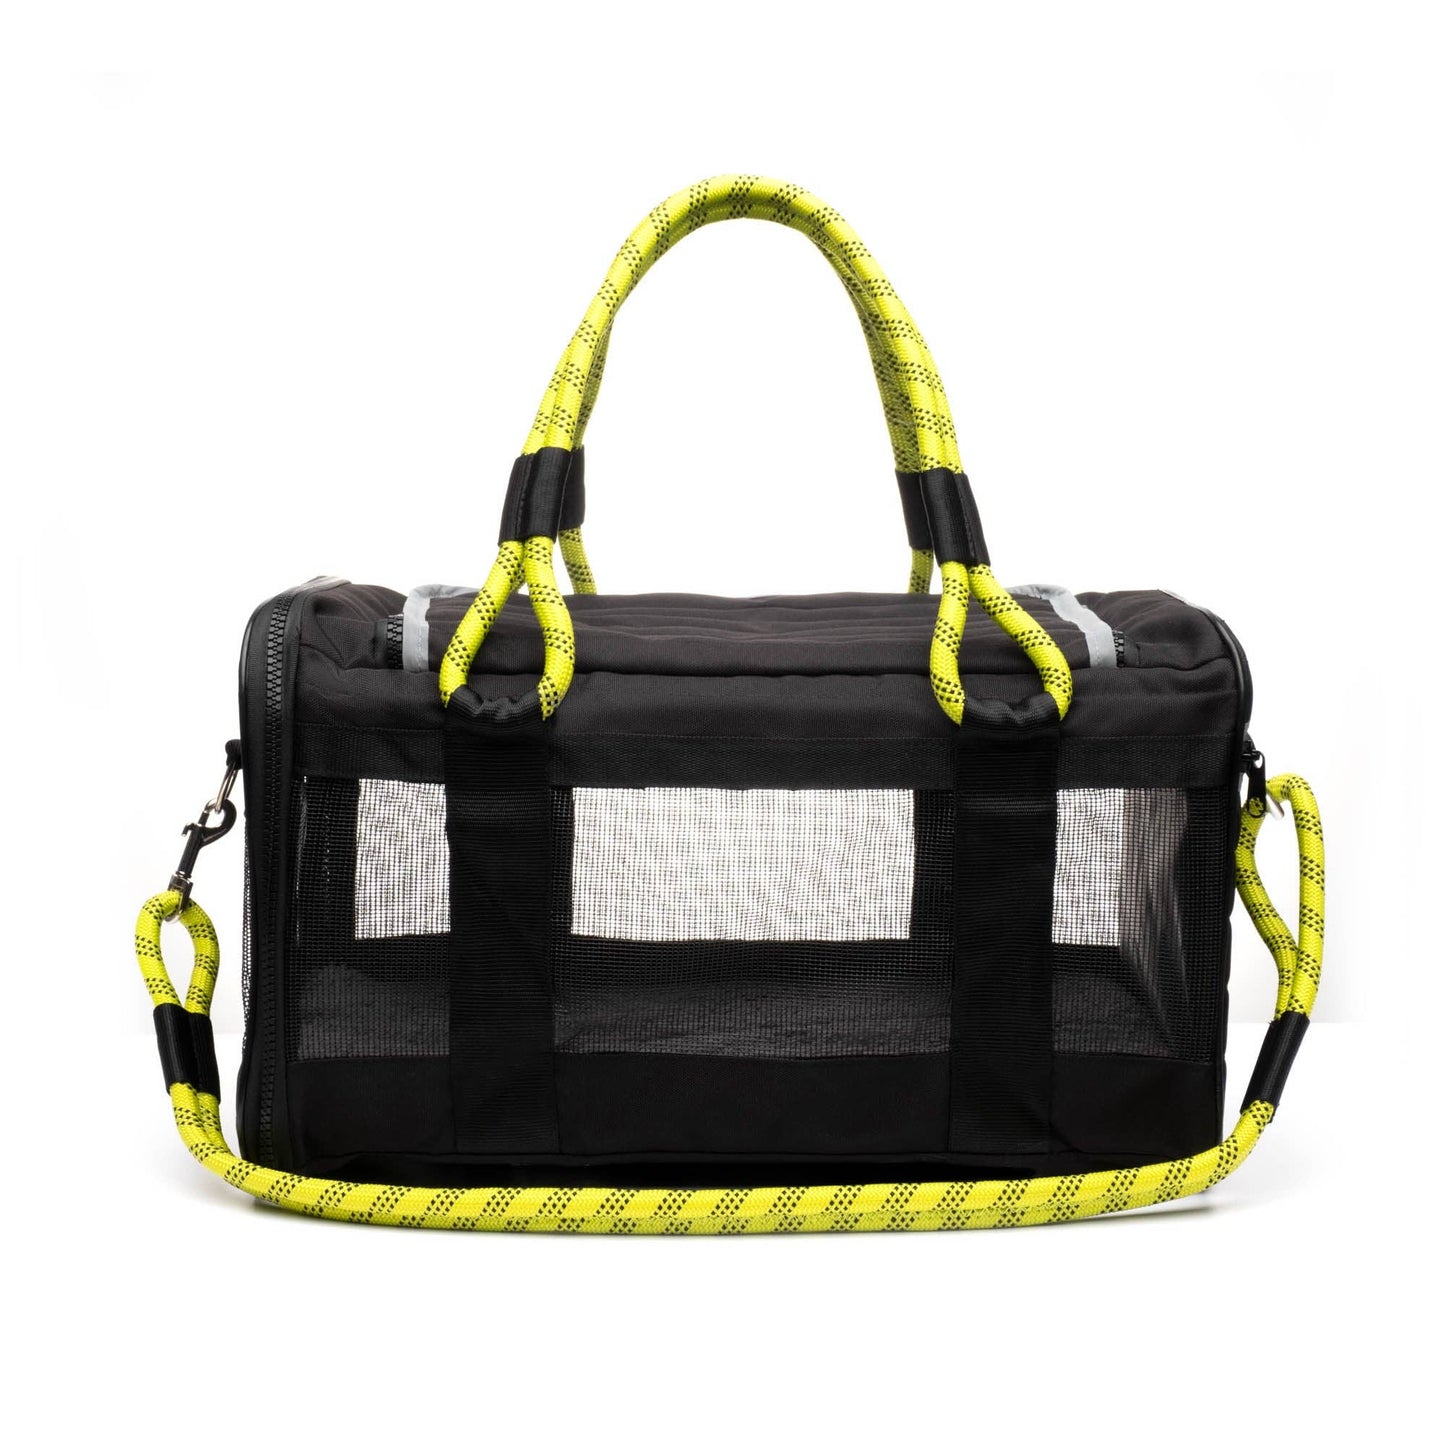 ROVERLUND - OUT-OF-OFFICE PET CARRIER BLACK / YELLOW Image